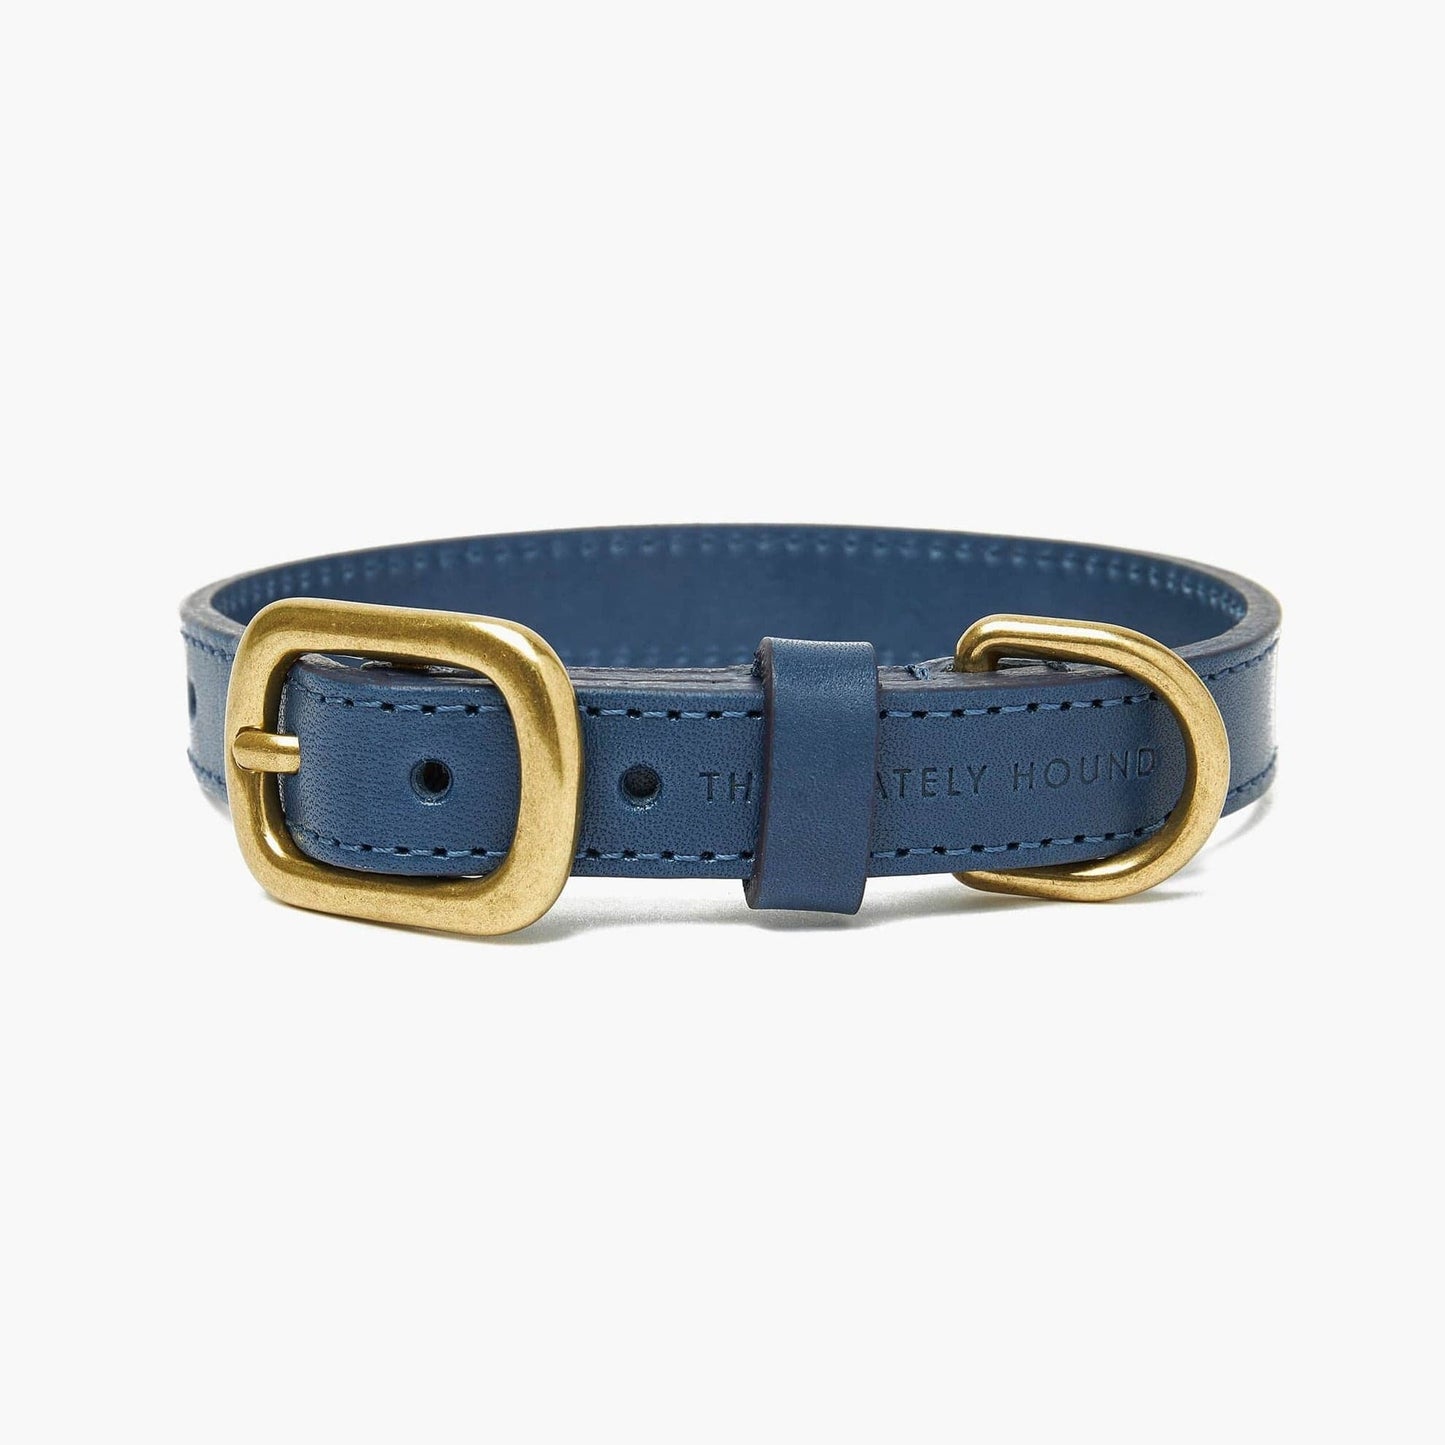 Sapphire Blue Leather Dog Collar & Lead Set with Gold Hardware